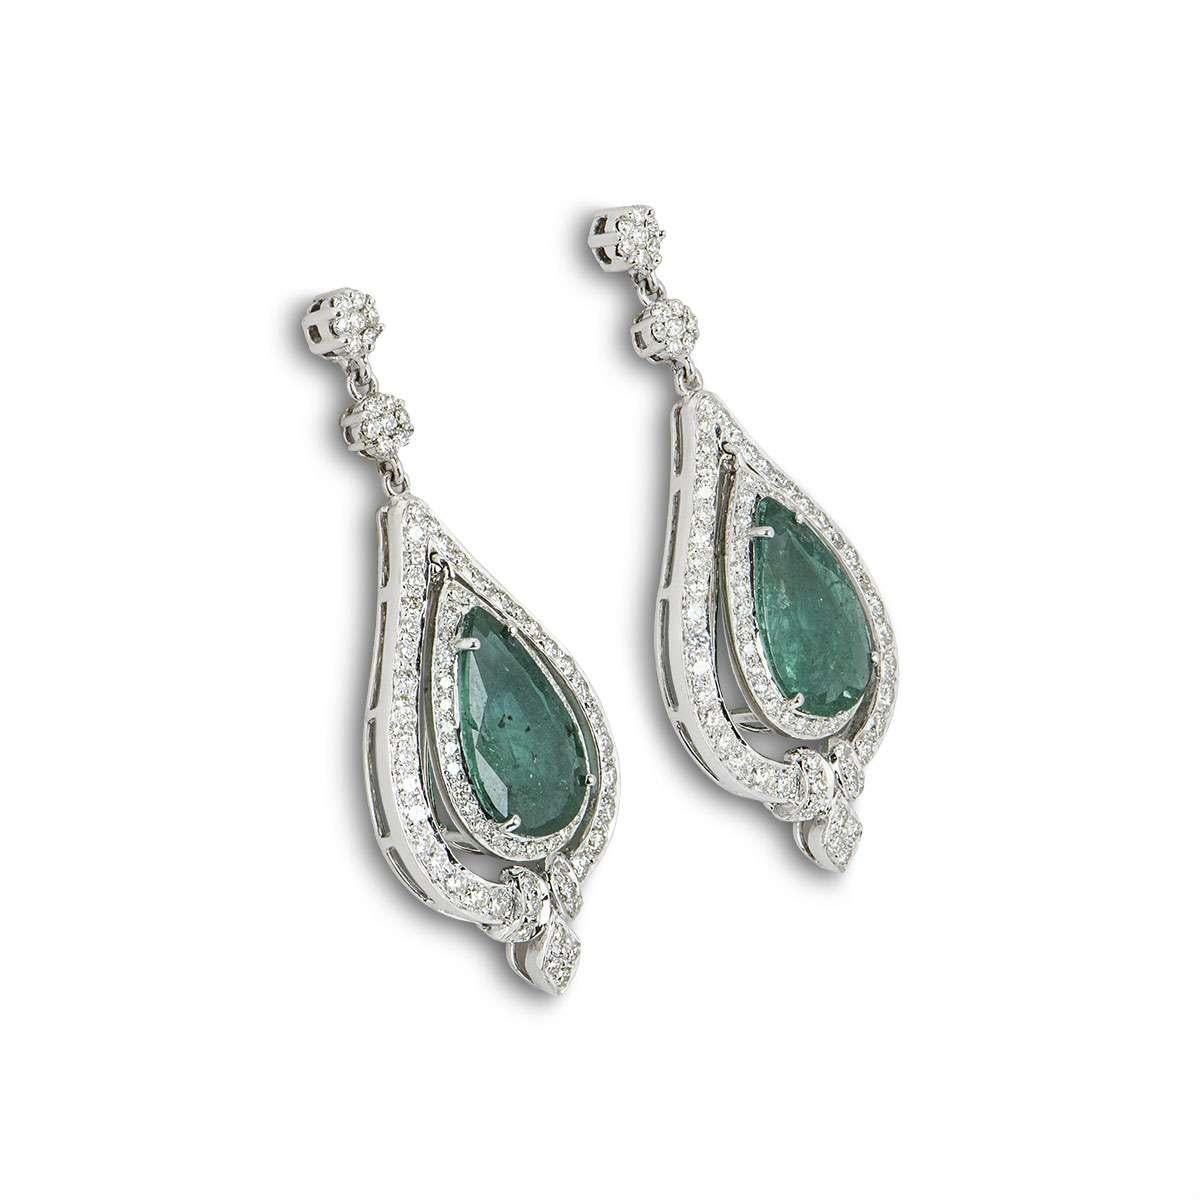 A pair of 18k white gold emerald and diamond drop earrings. The earrings are each set with a pear shaped emerald in the centre, surrounded by a double halo of round brilliant cut diamonds and two small diamond set flower motifs. The emeralds have a